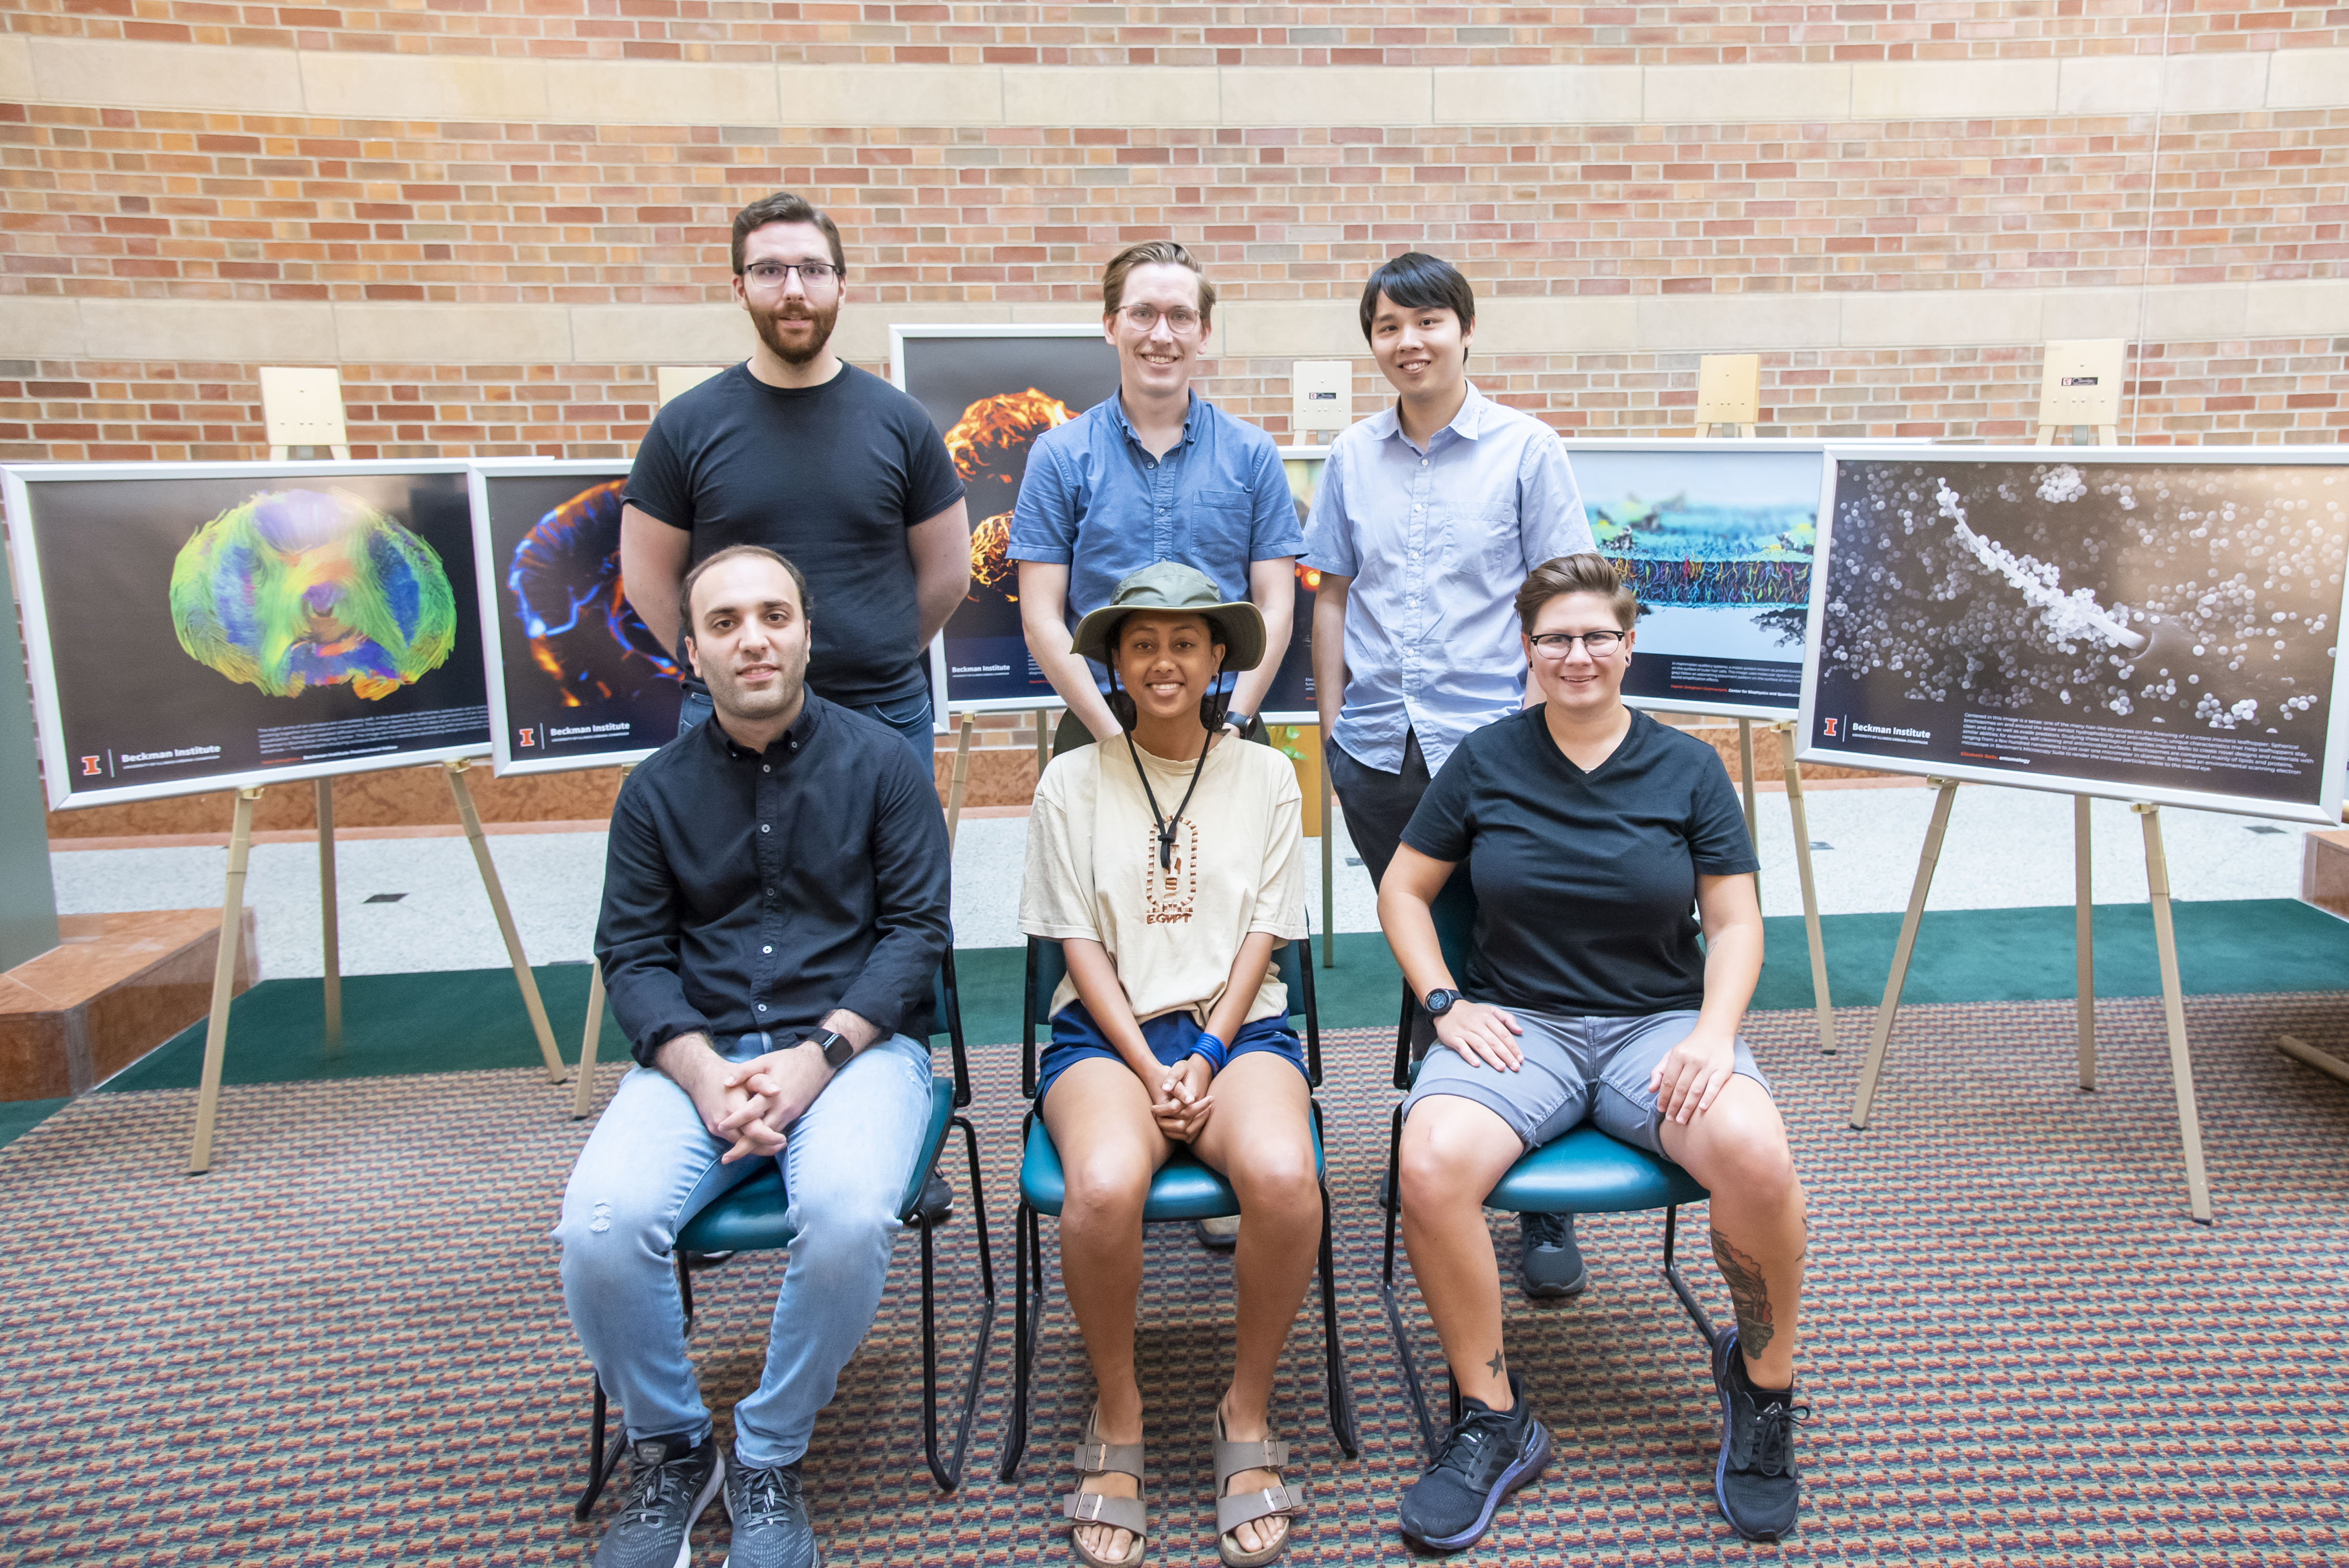 The six winners of the 2022 Beckman Institute Research Image Contest pose, three sitting on chairs and three standing behind them, in front of their winning images, which are framed and mounted on easels.